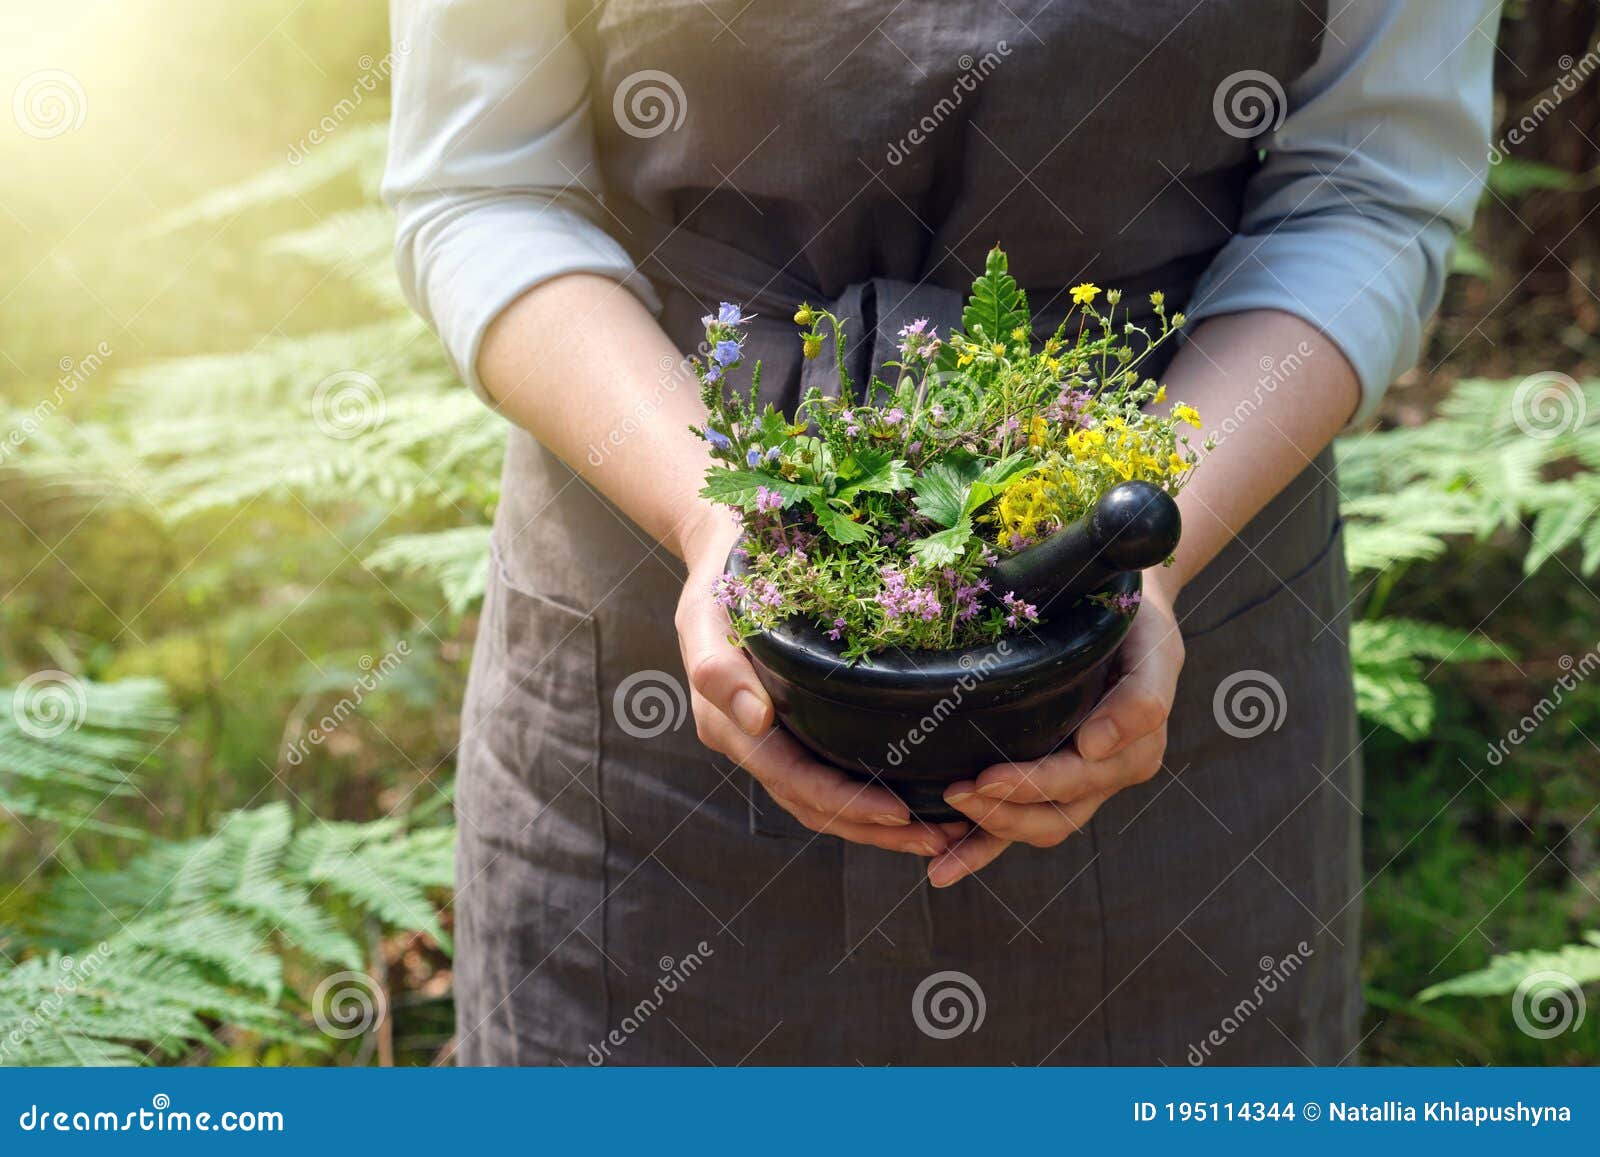 woman holding in her hands a mortar of medicinal herbs. herbalist woman gathering healing plants in forest